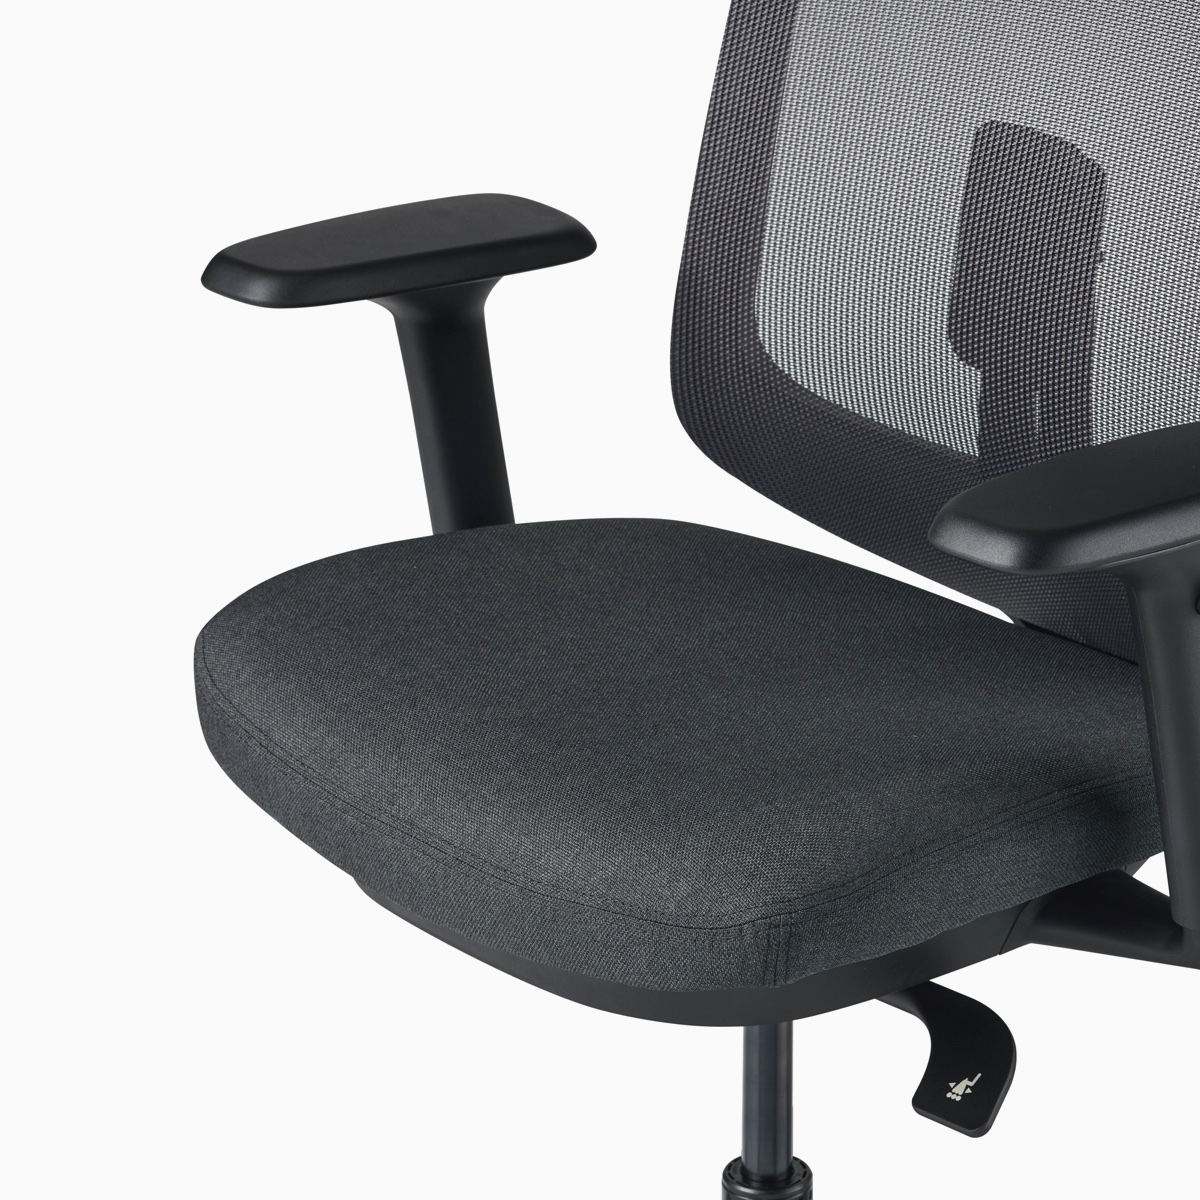 A close-up view of a Verus Chair's black upholstered seat.